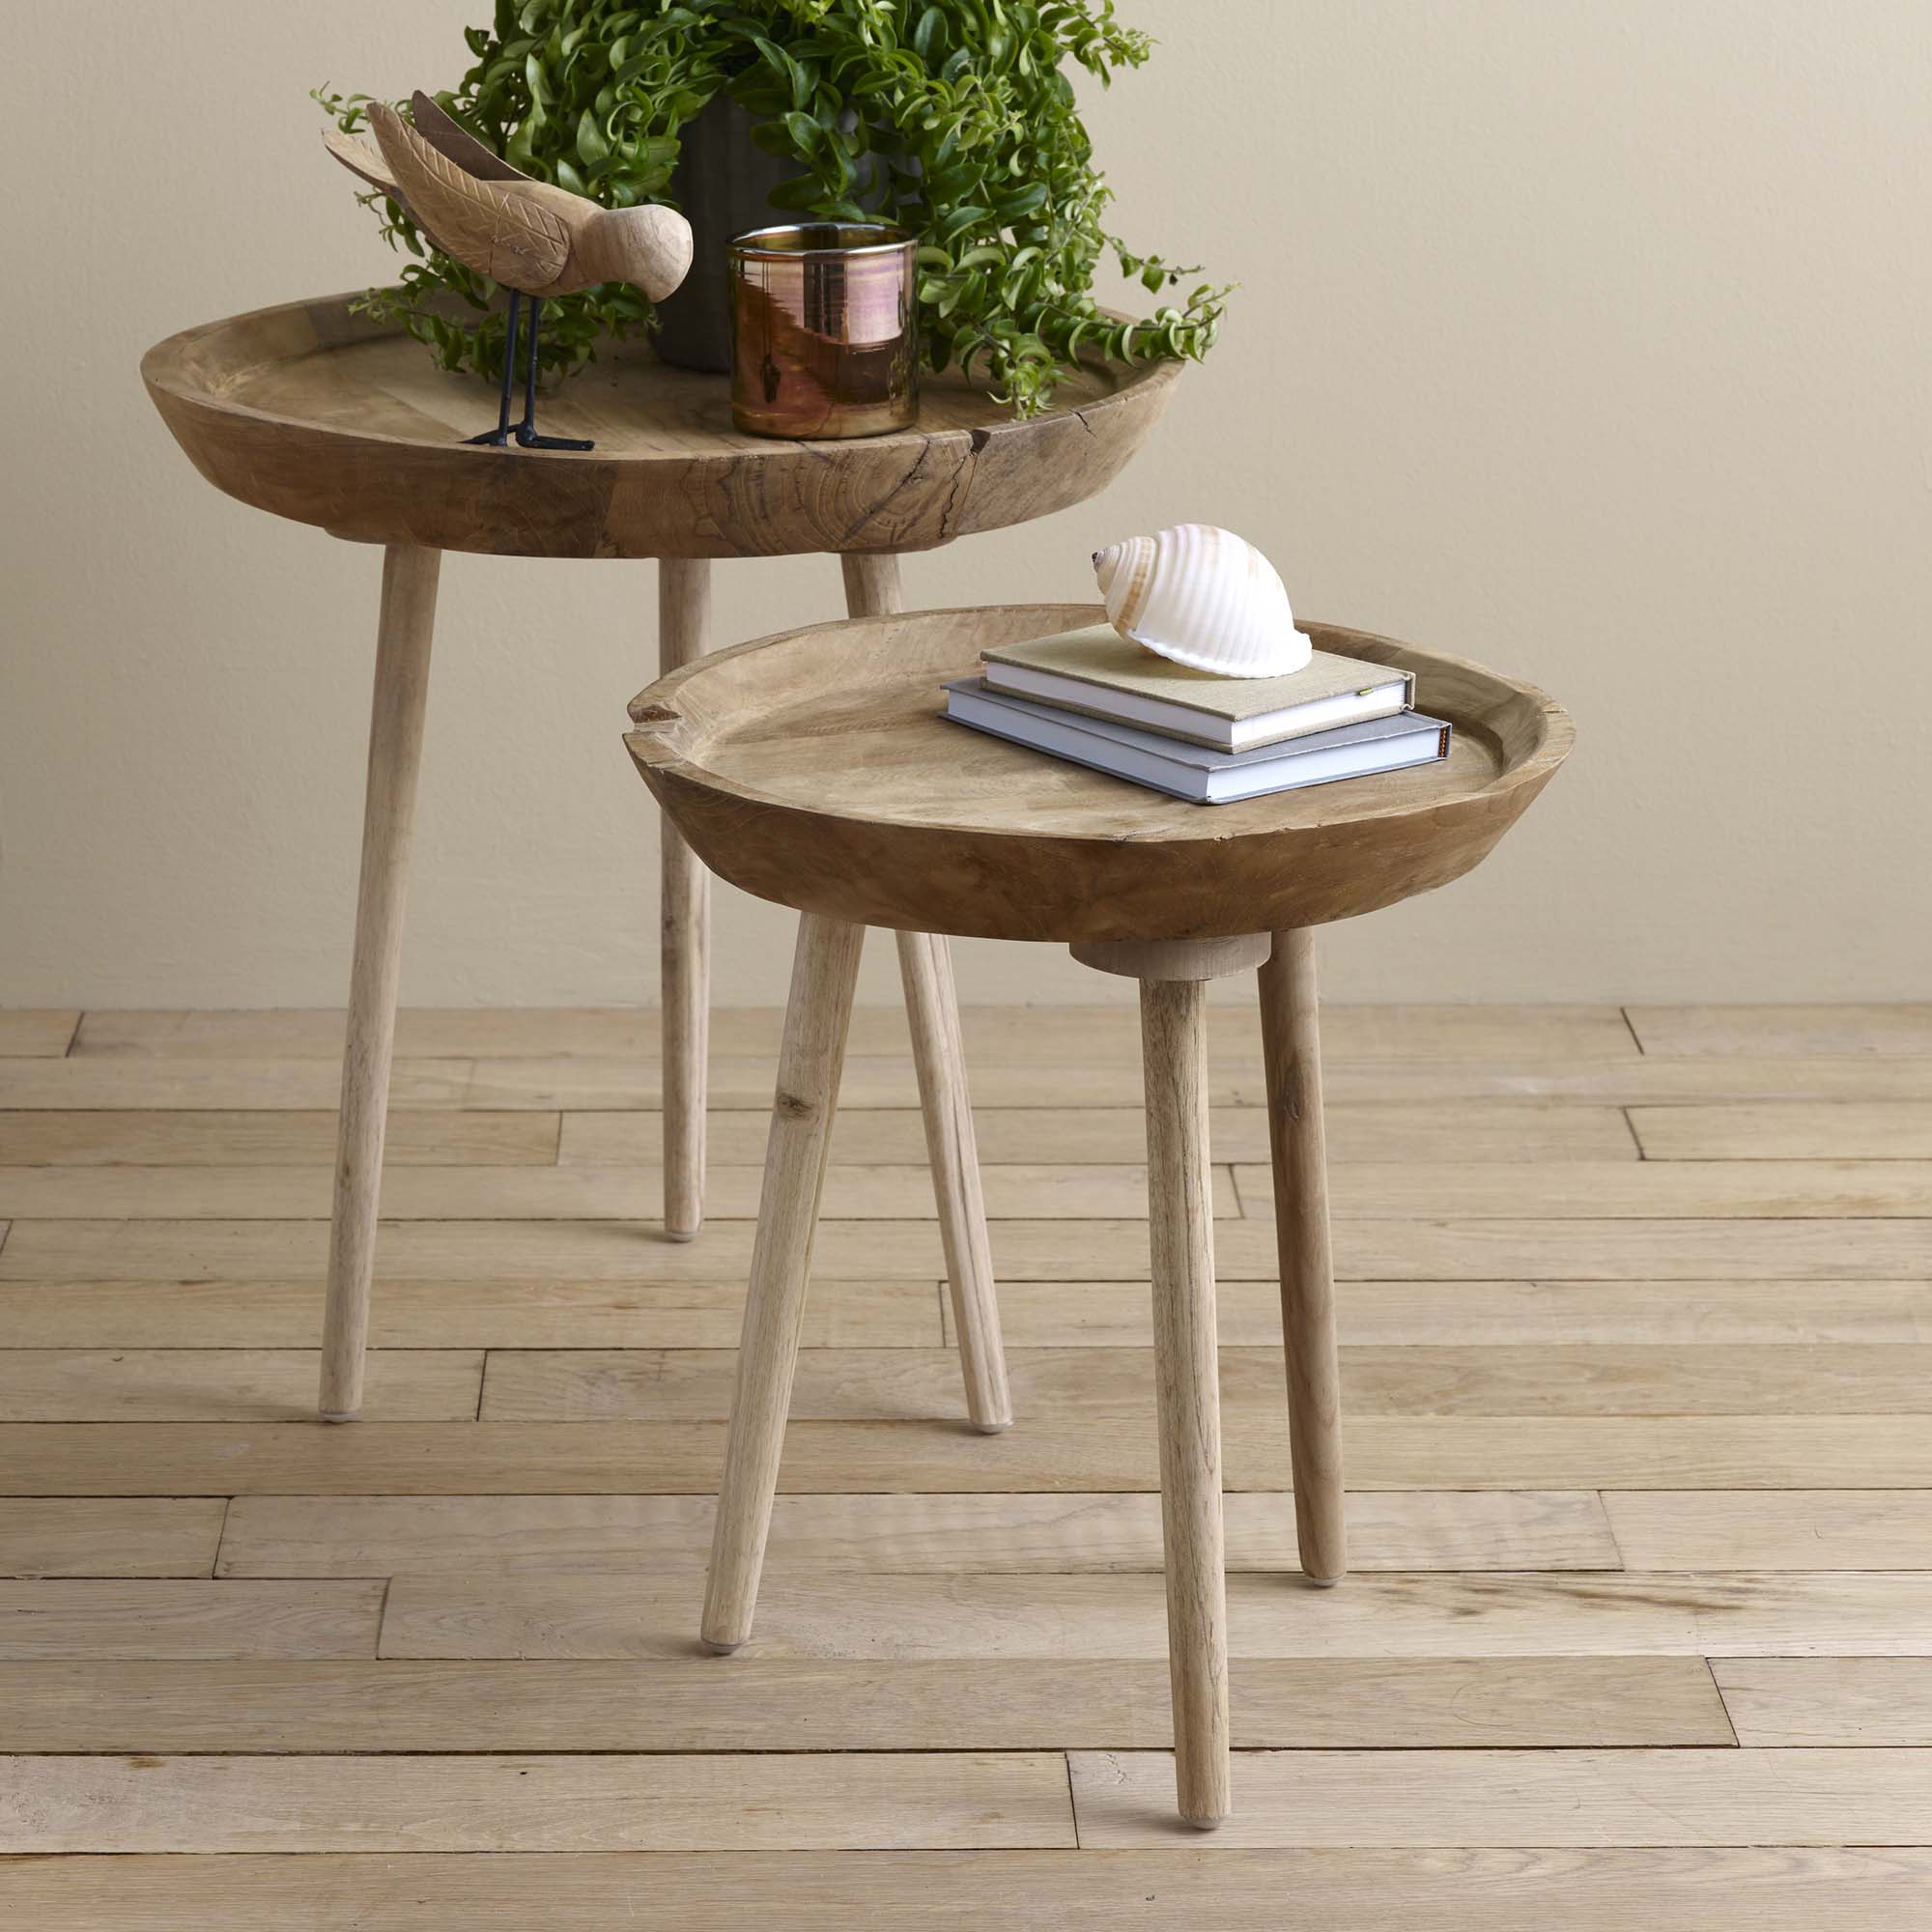 Takara Teak Round Table (Tall) Silver Color | Image 3 | From the Takara Collection | Elegantly crafted with natural teak for long lasting use | This table is sustainably sourced | Available in natural color | texxture home